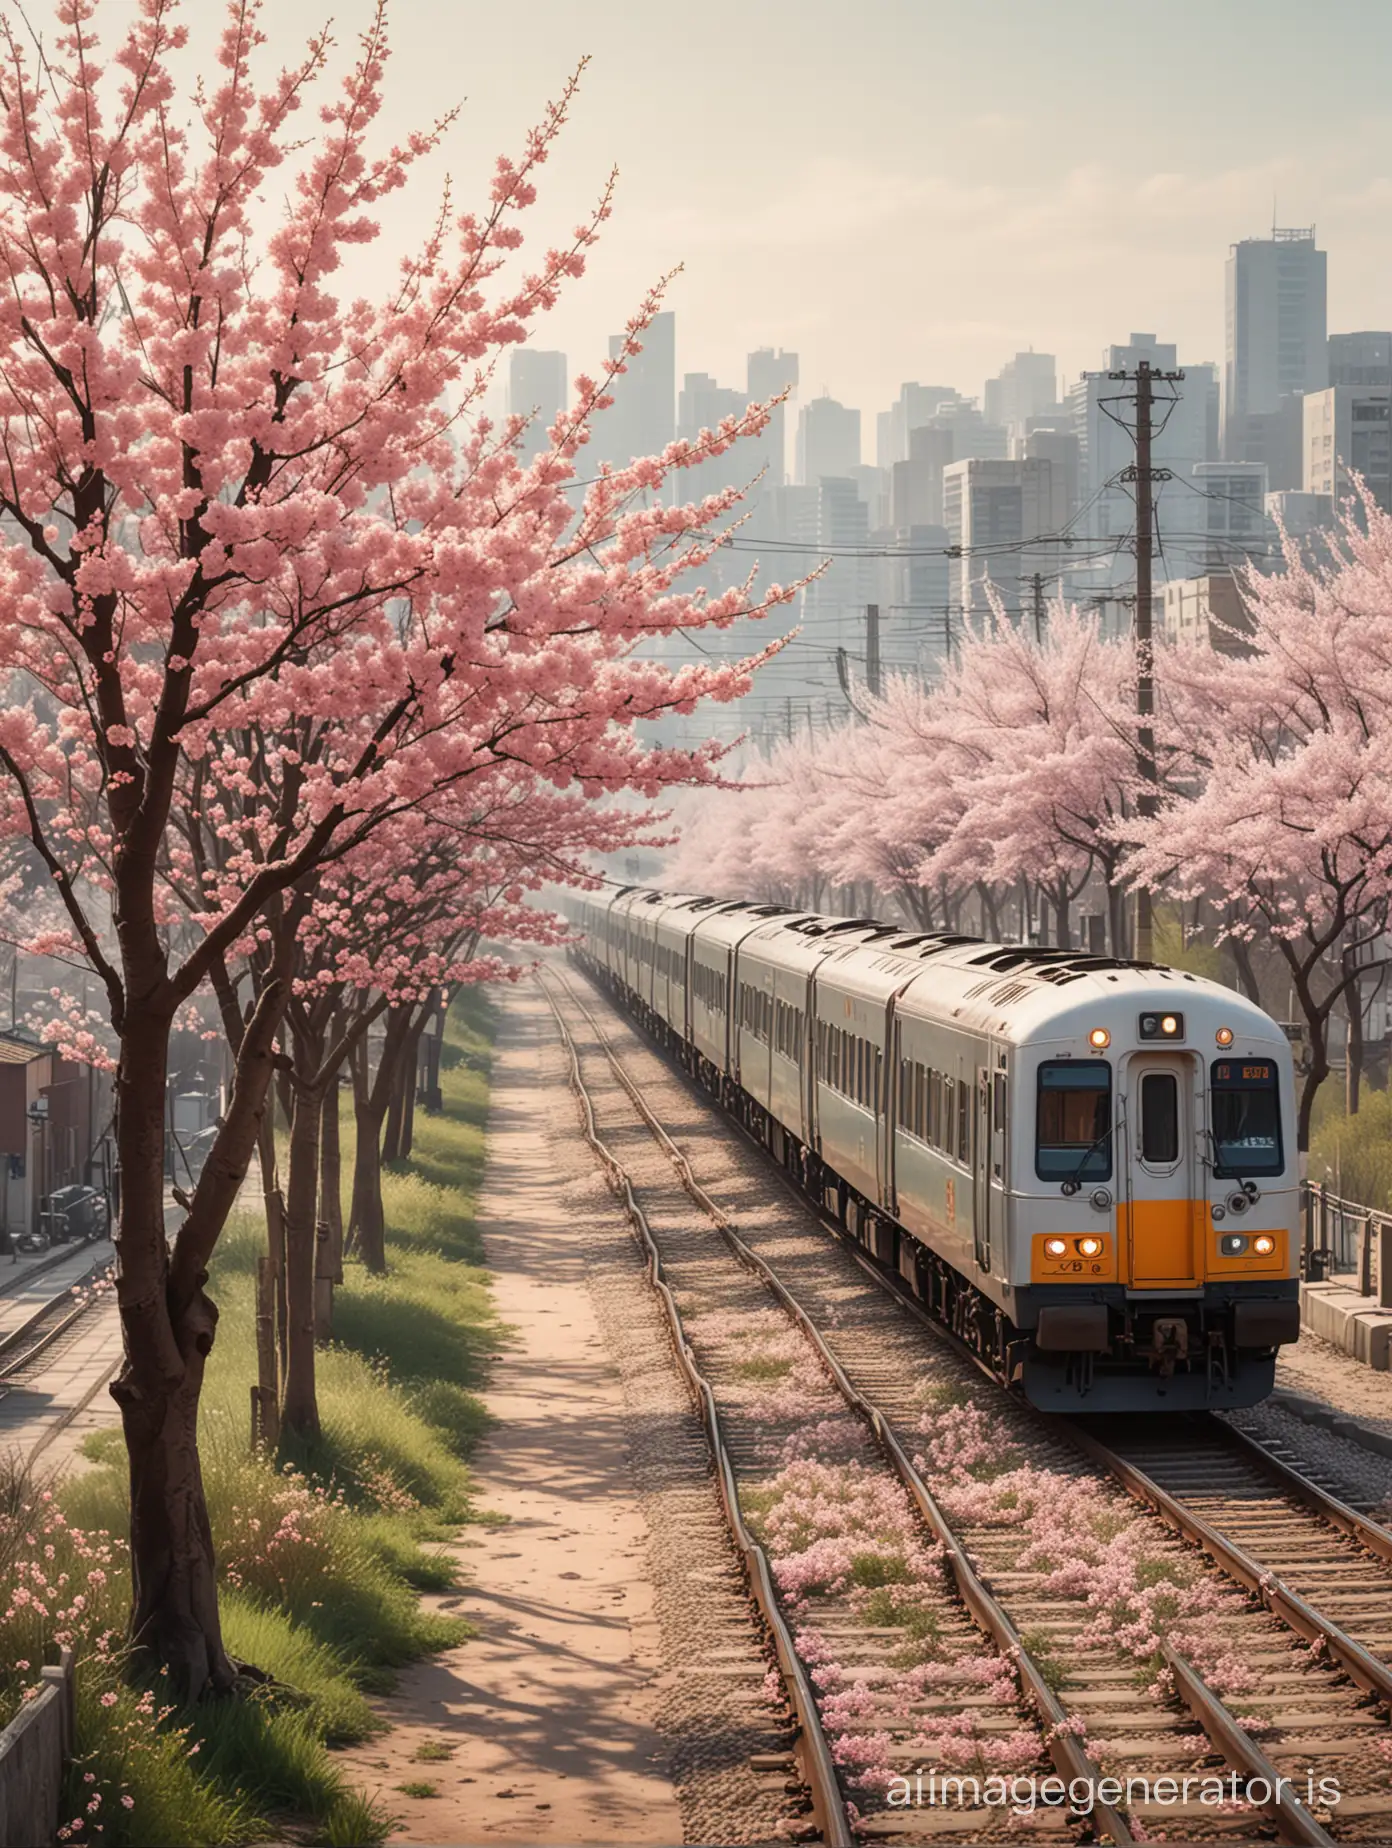 Spring-Urban-Landscape-Photography-Train-Passing-Peach-Blossom-Trees